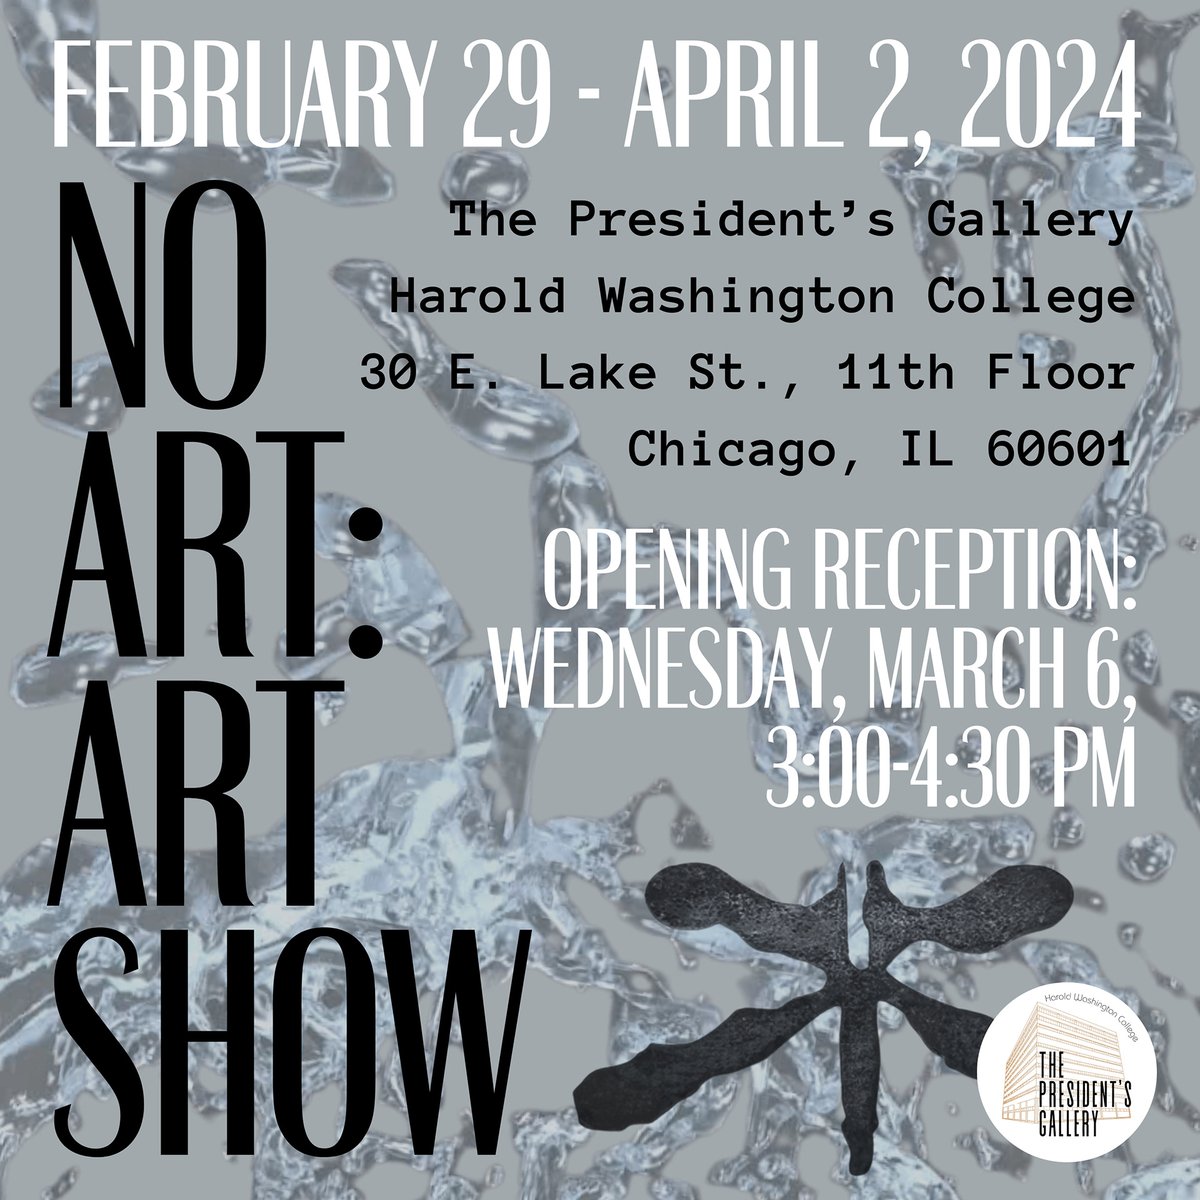 Some of the amazing scientific visualizations produced by the ALCF Visualization and Data Analytics Team and our user community will be on display at the 'No Art : Art Show” from Feb. 29-April 2 at @HW_College. thepresidentsgallery.myportfolio.com/no-art-art-show